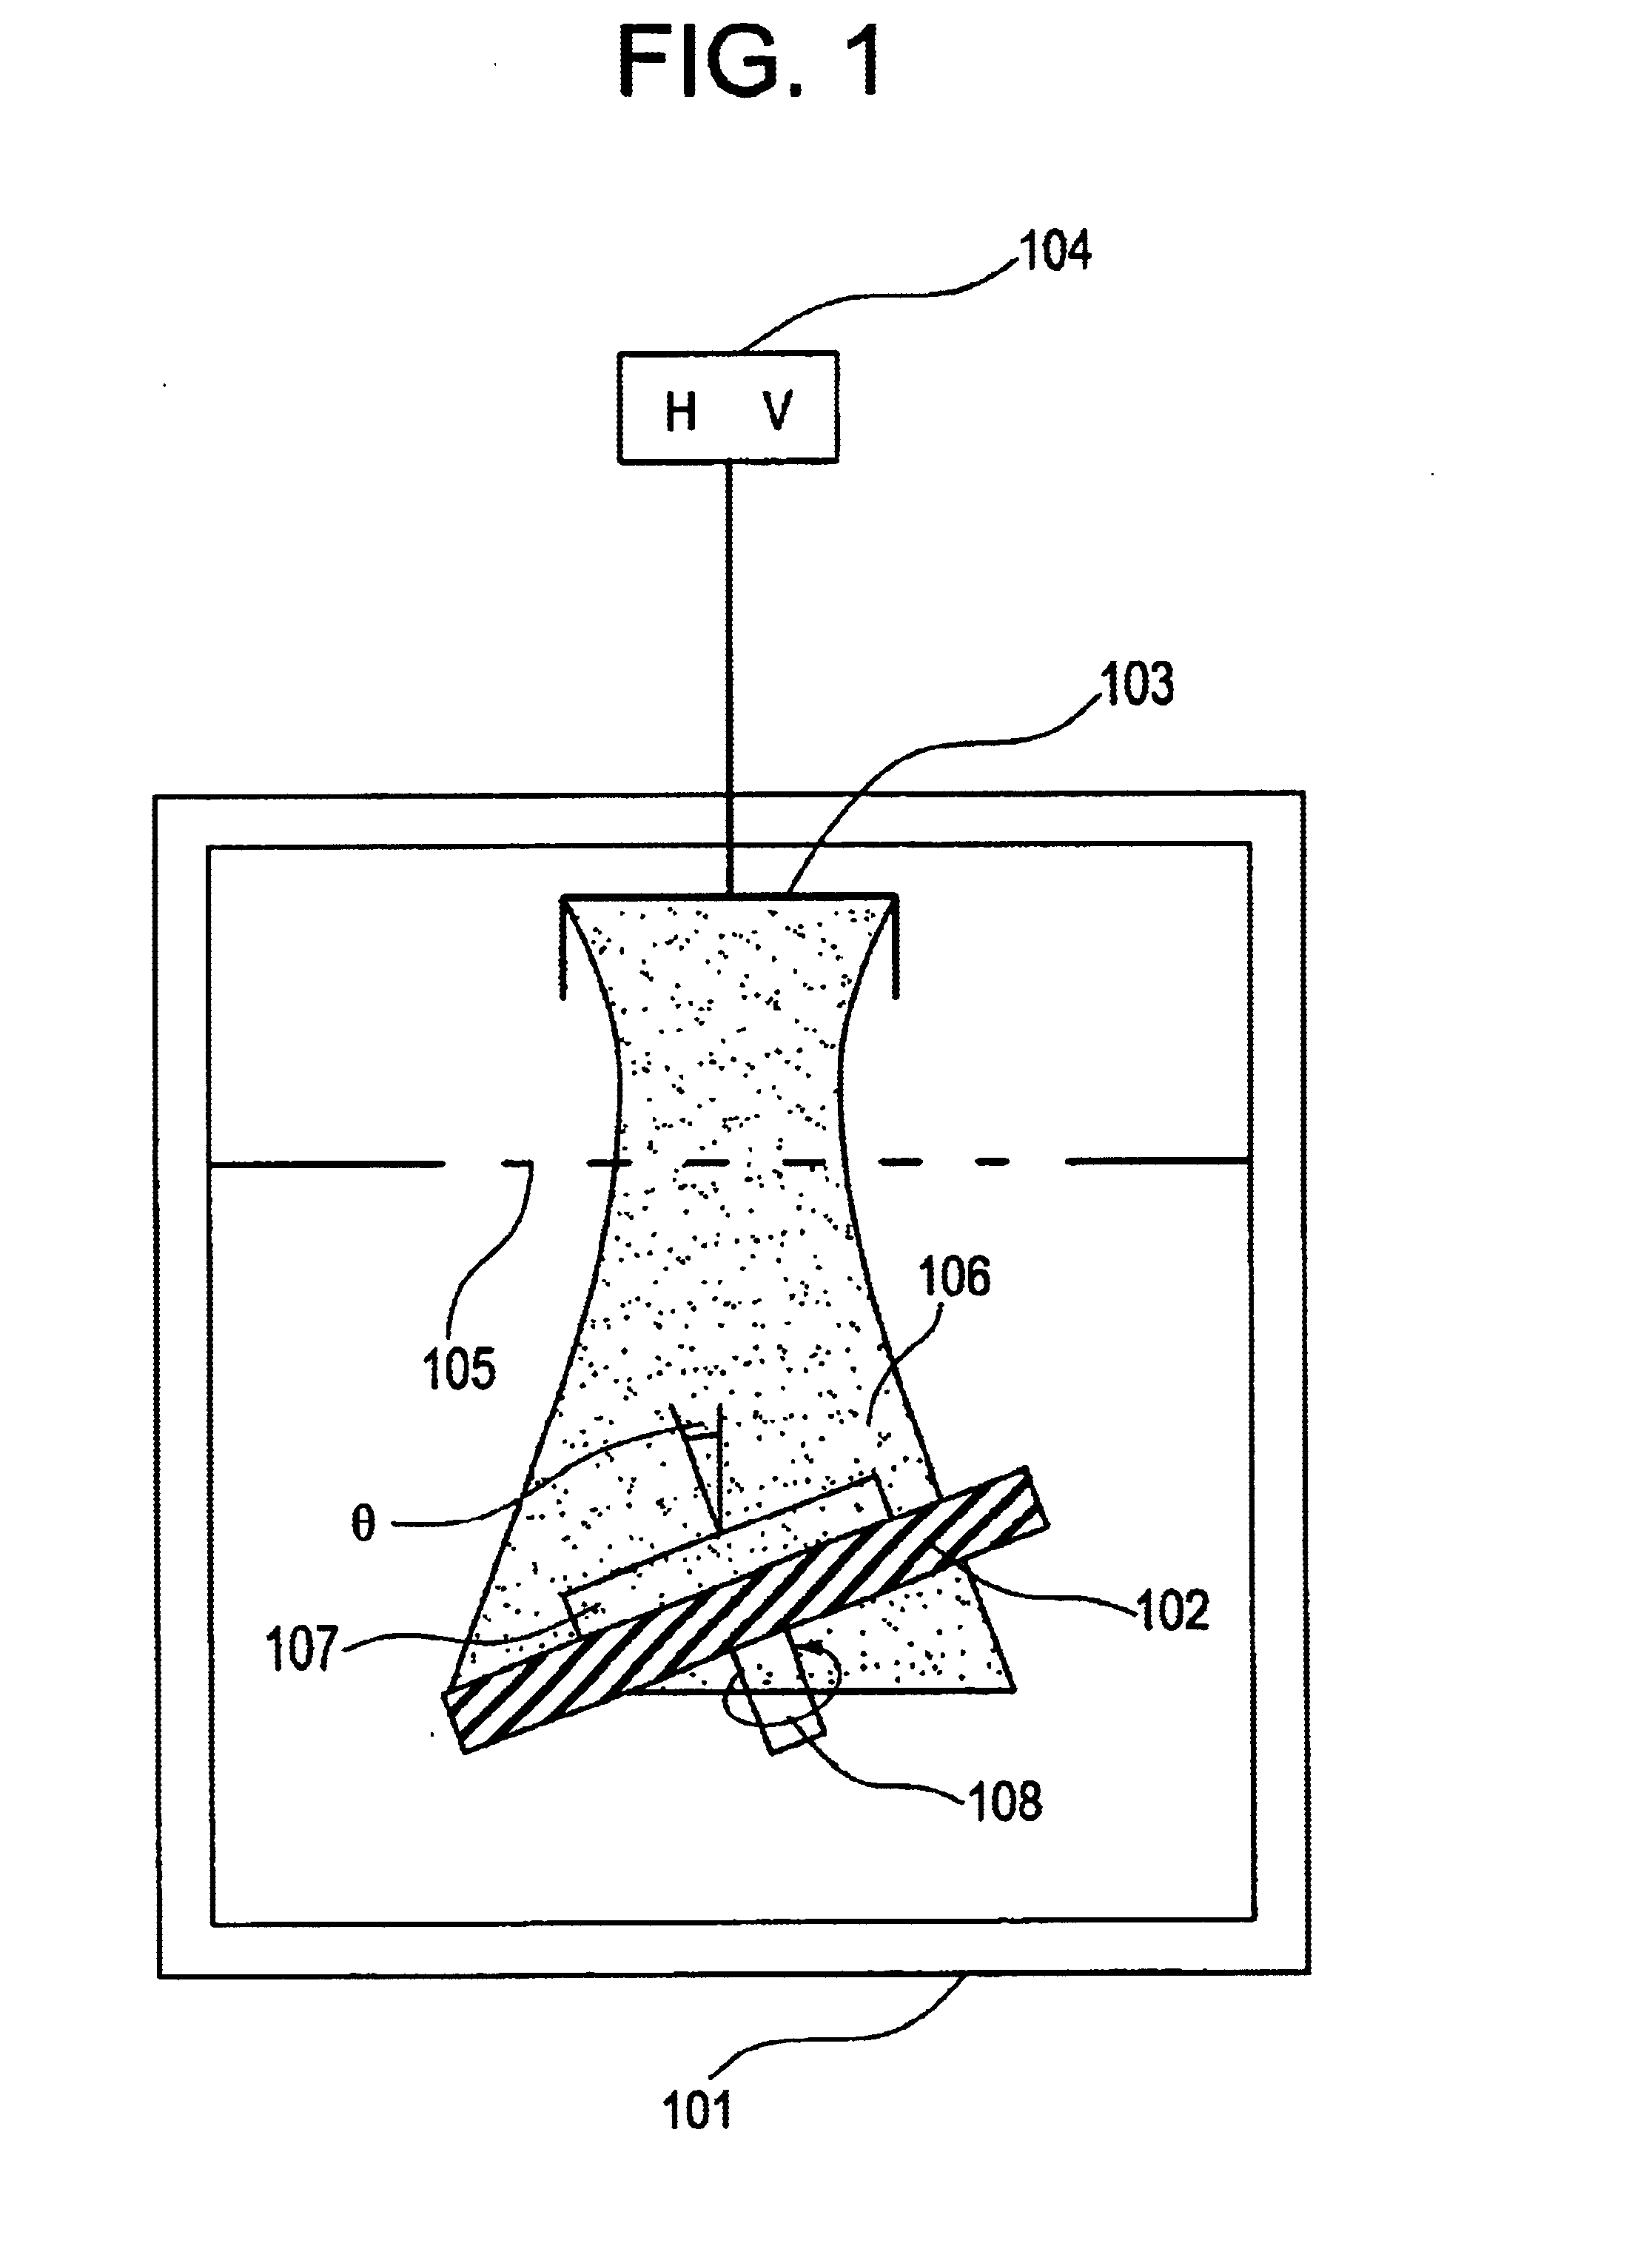 Semiconductor device and method of manufacture thereof